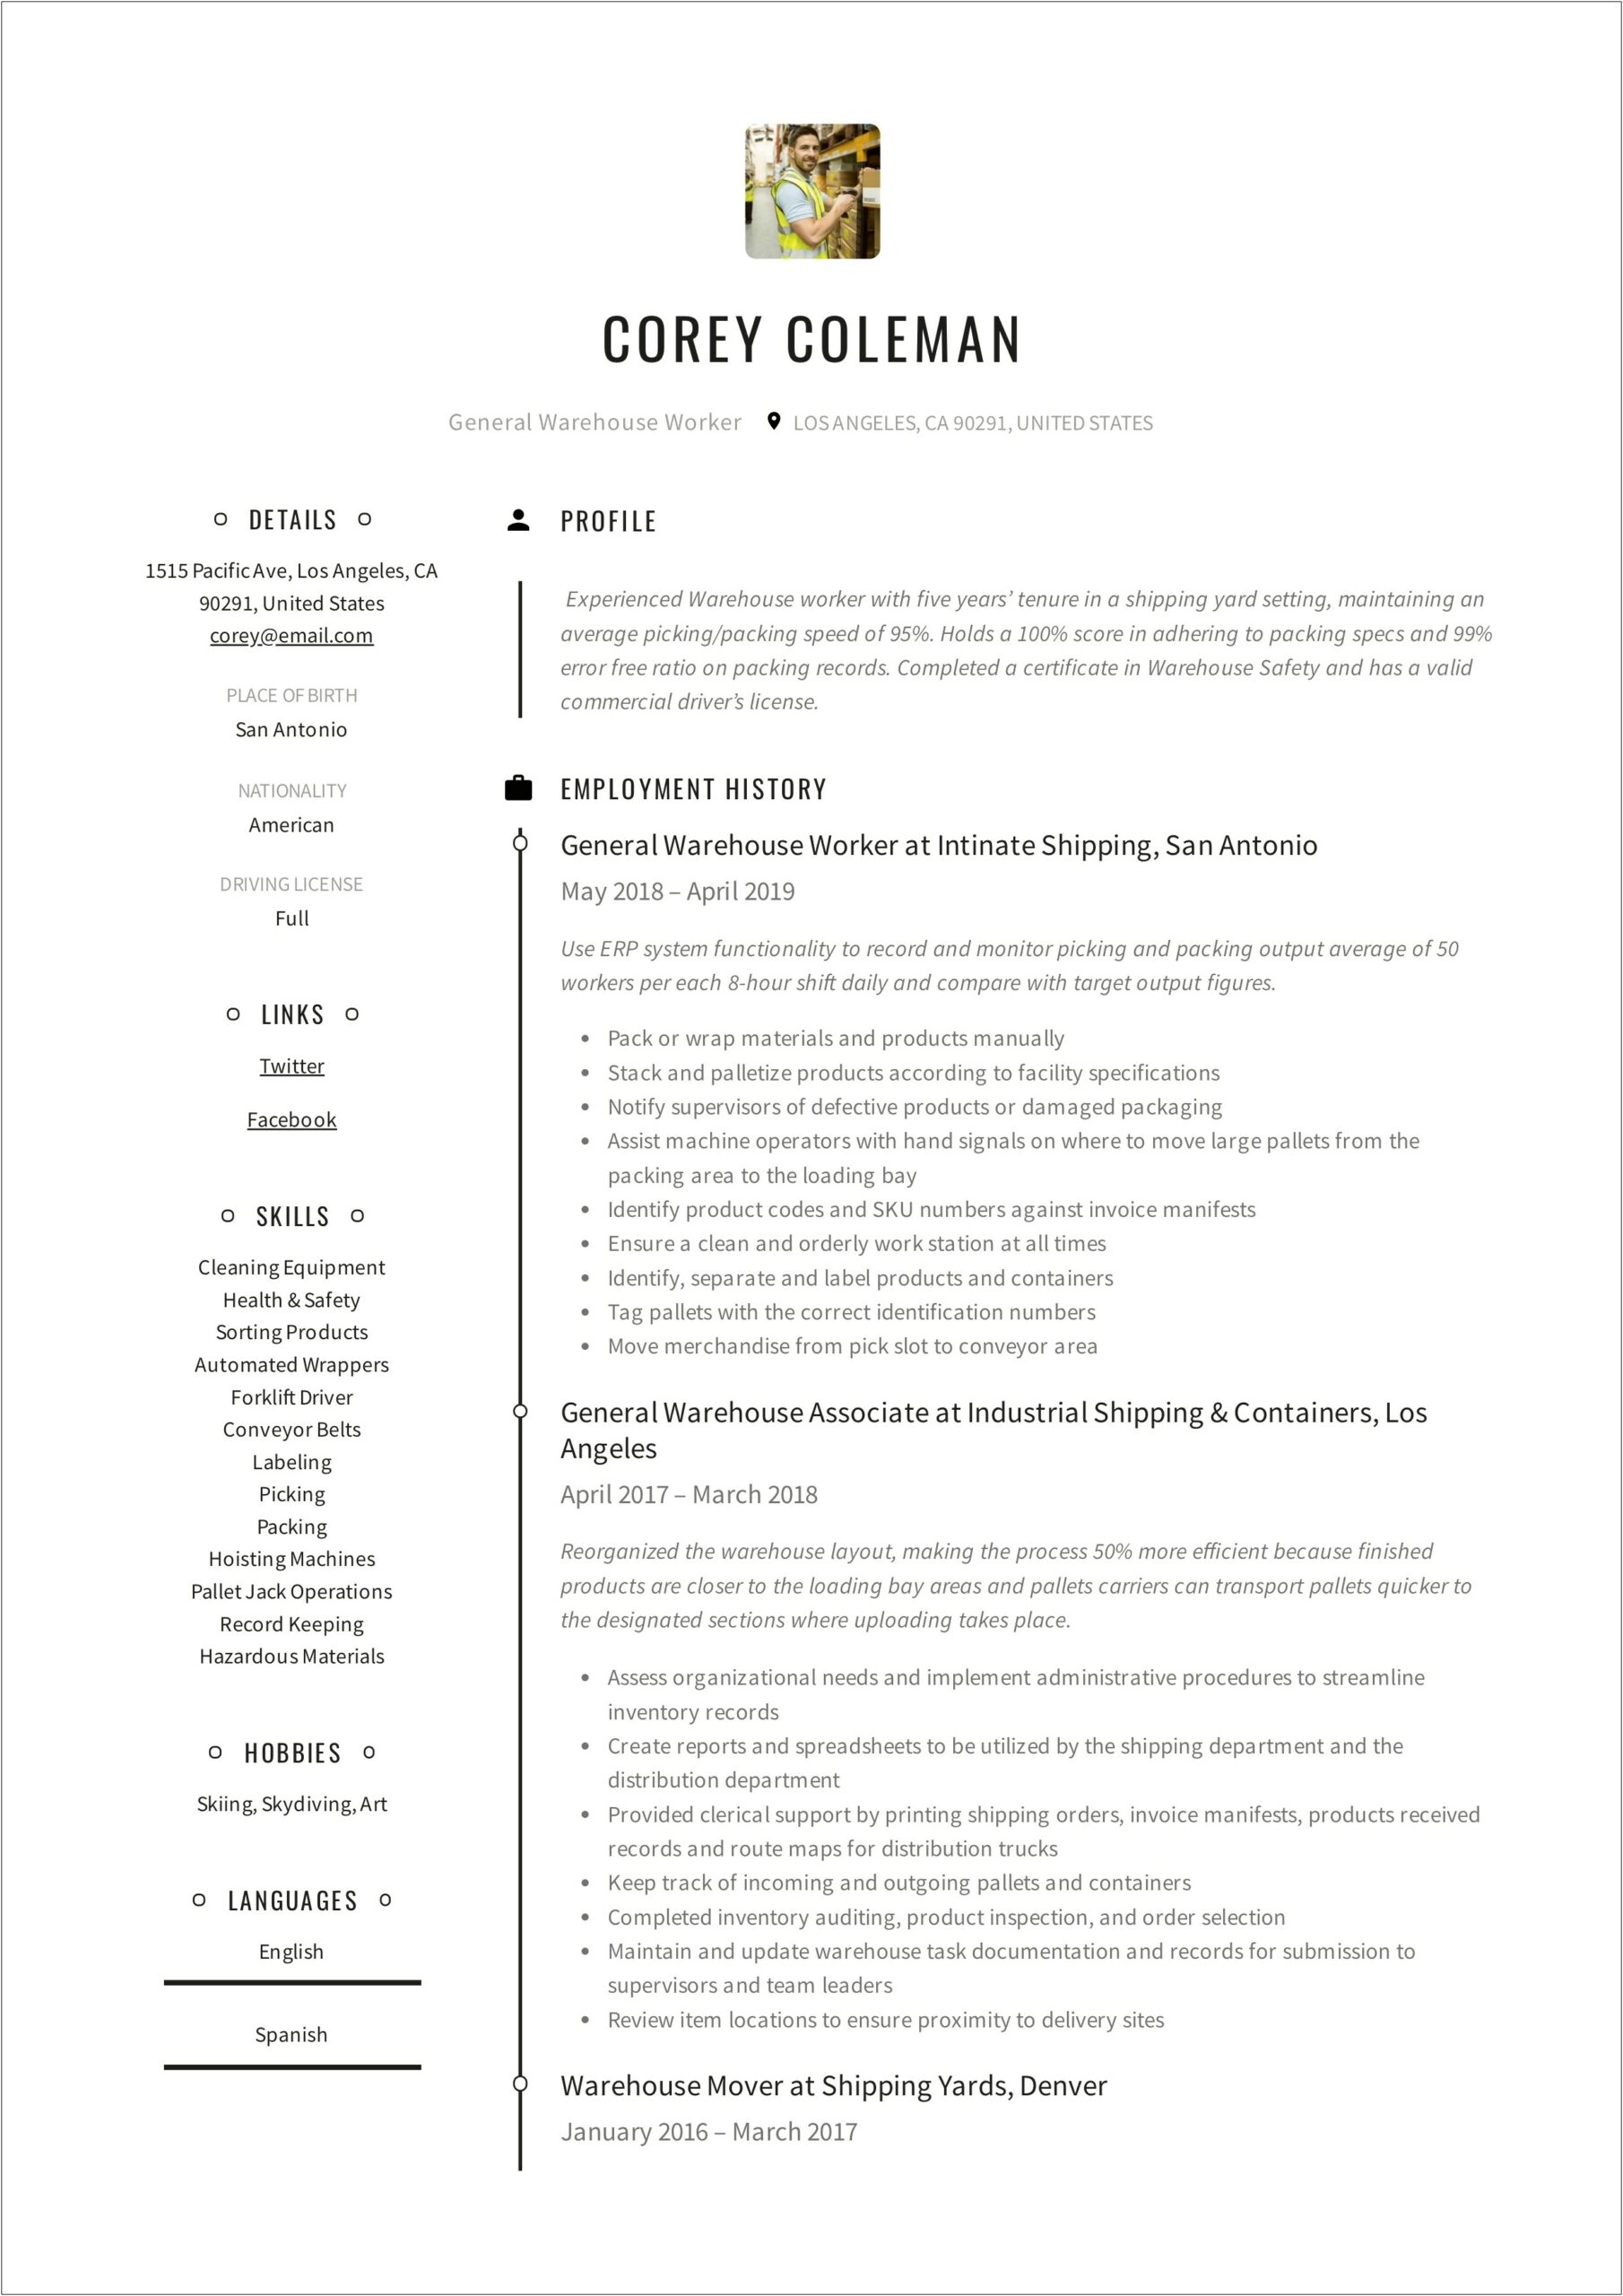 Personal Summary For A Warehouse Associate Resume